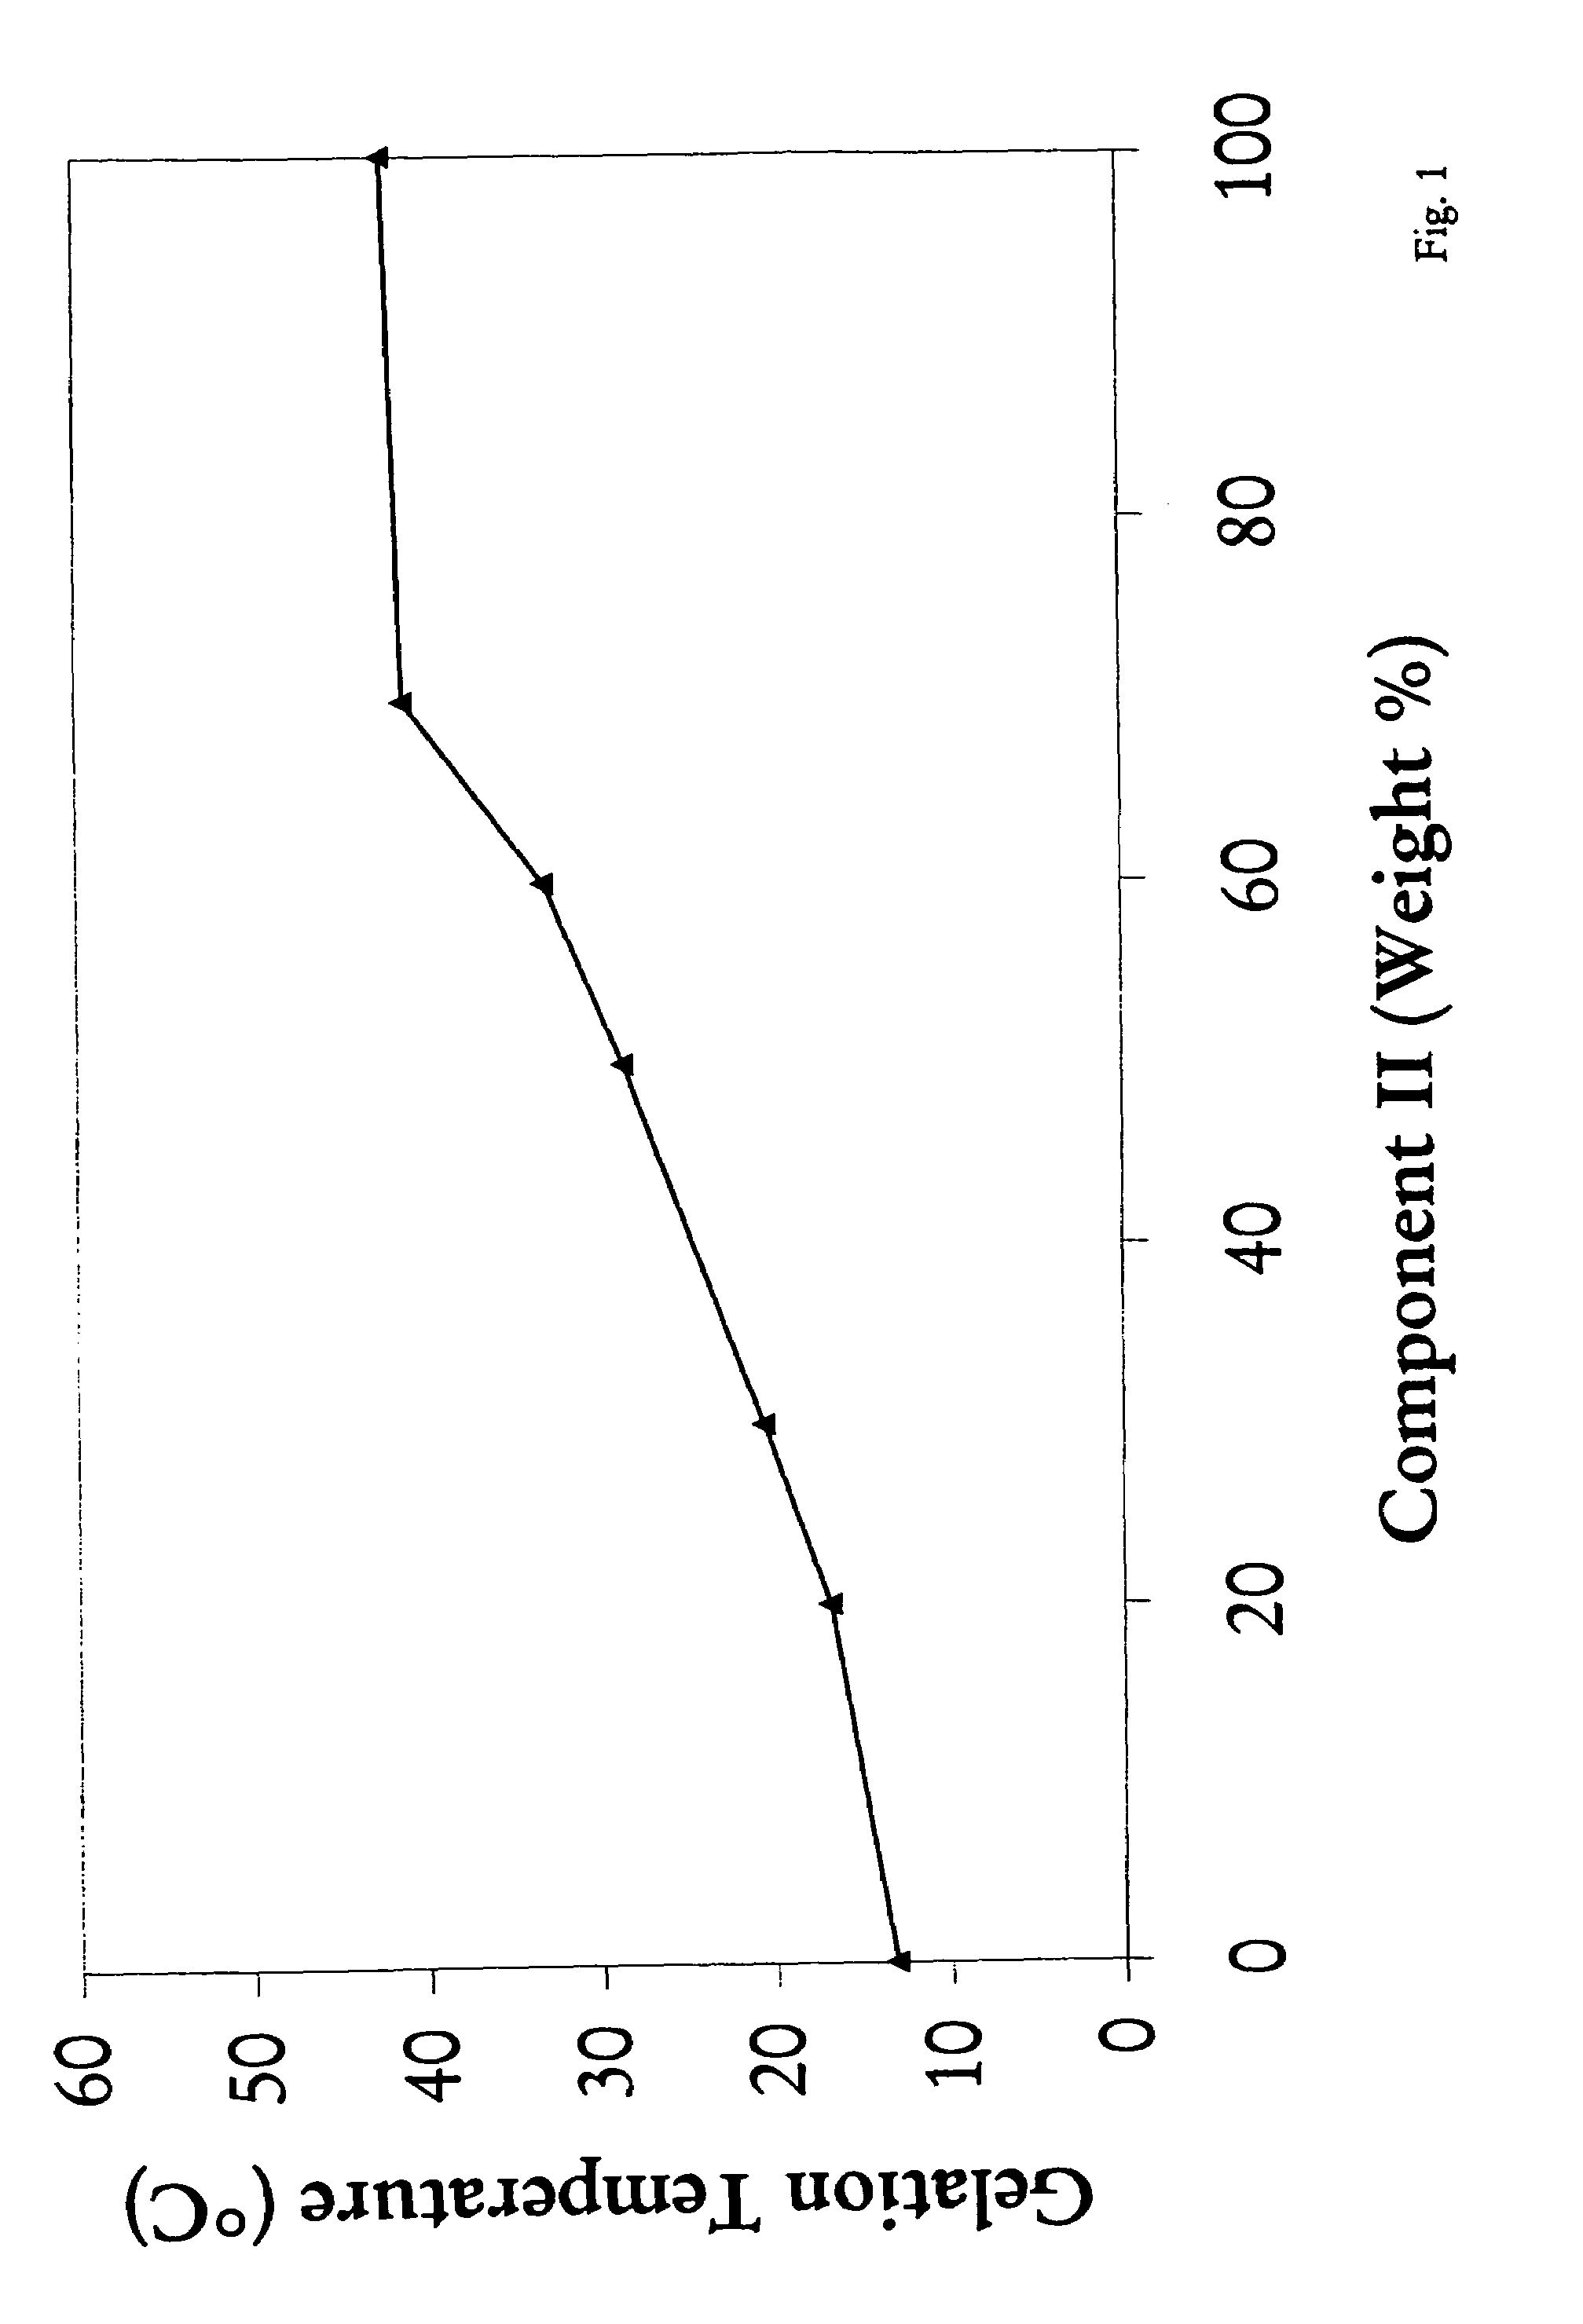 Mixtures of various triblock polyester polyethylene glycol copolymers having improved gel properties